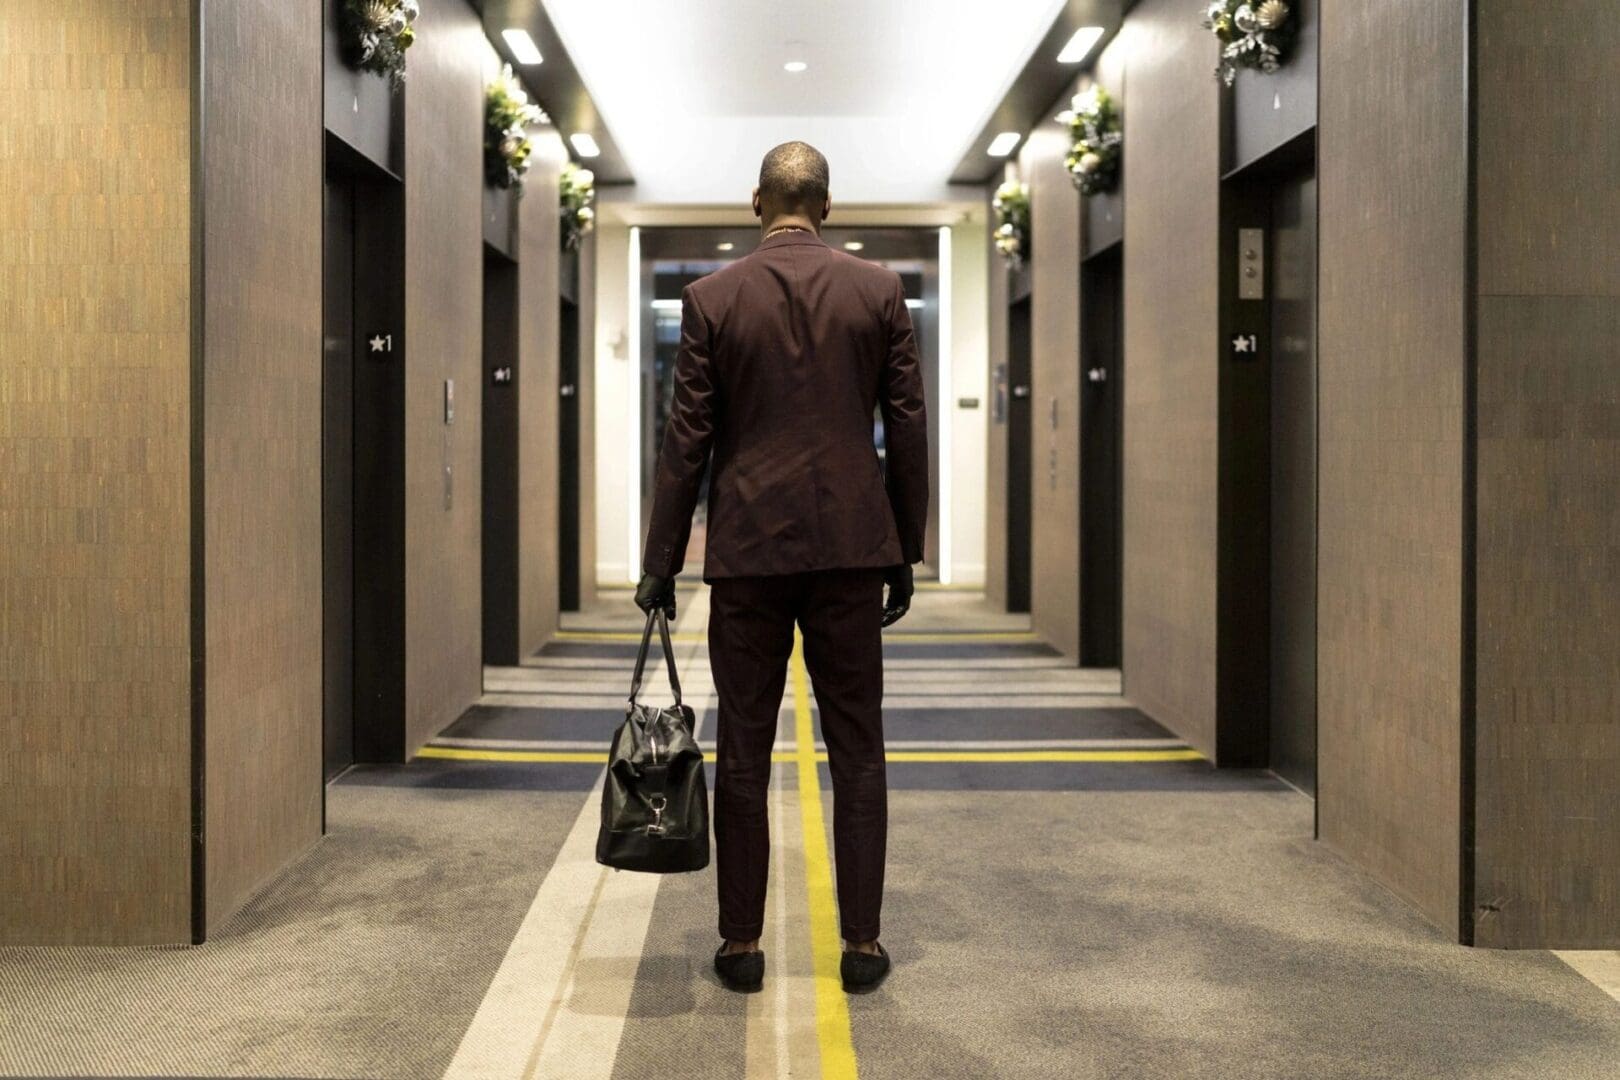 A man in a suit walking down an elevator.